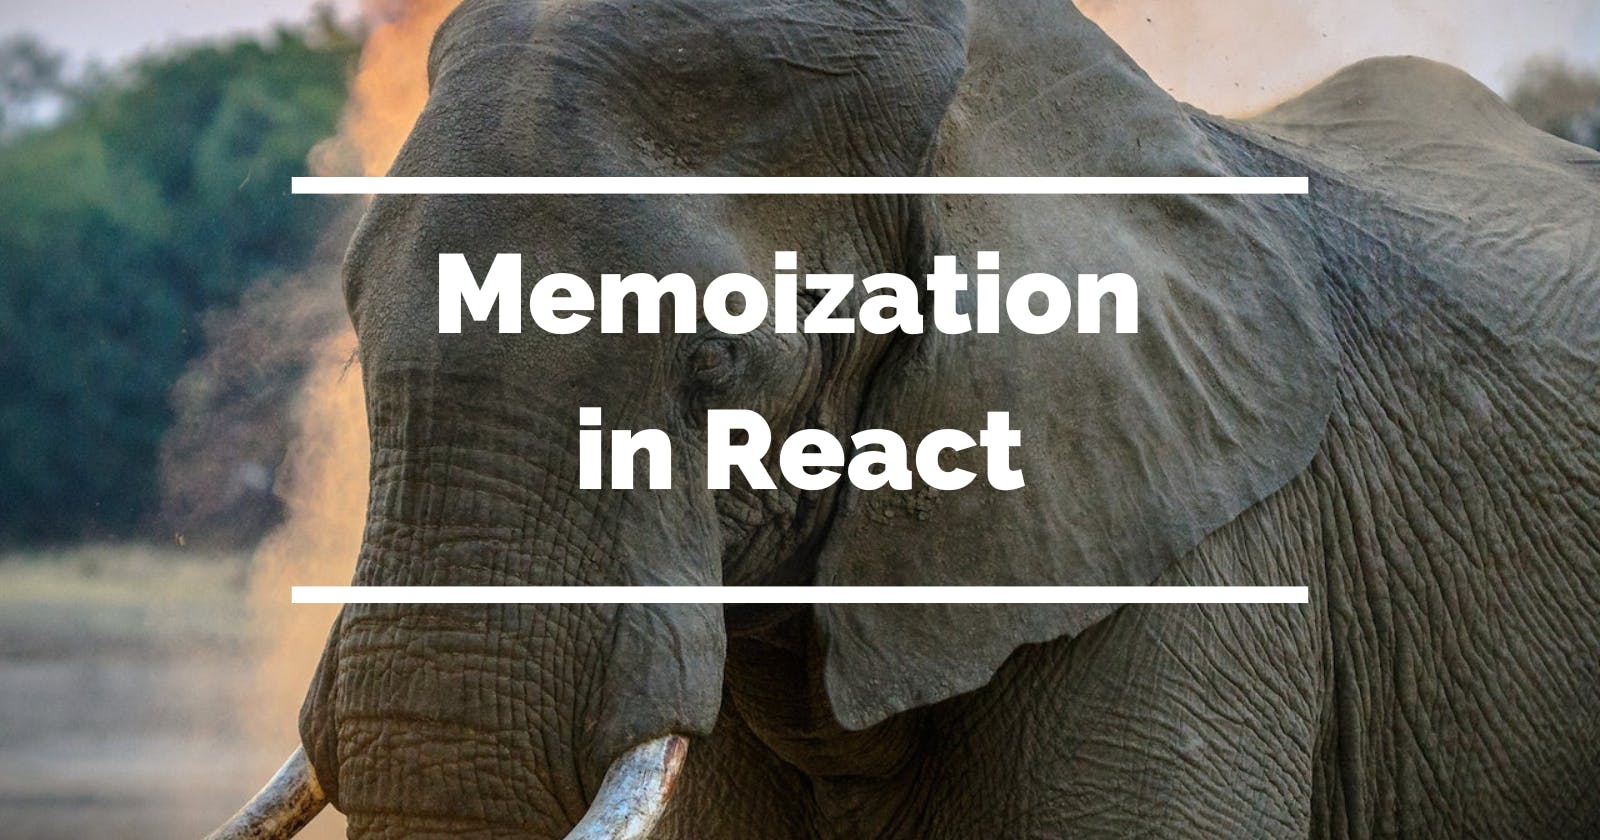 What is memoization in React